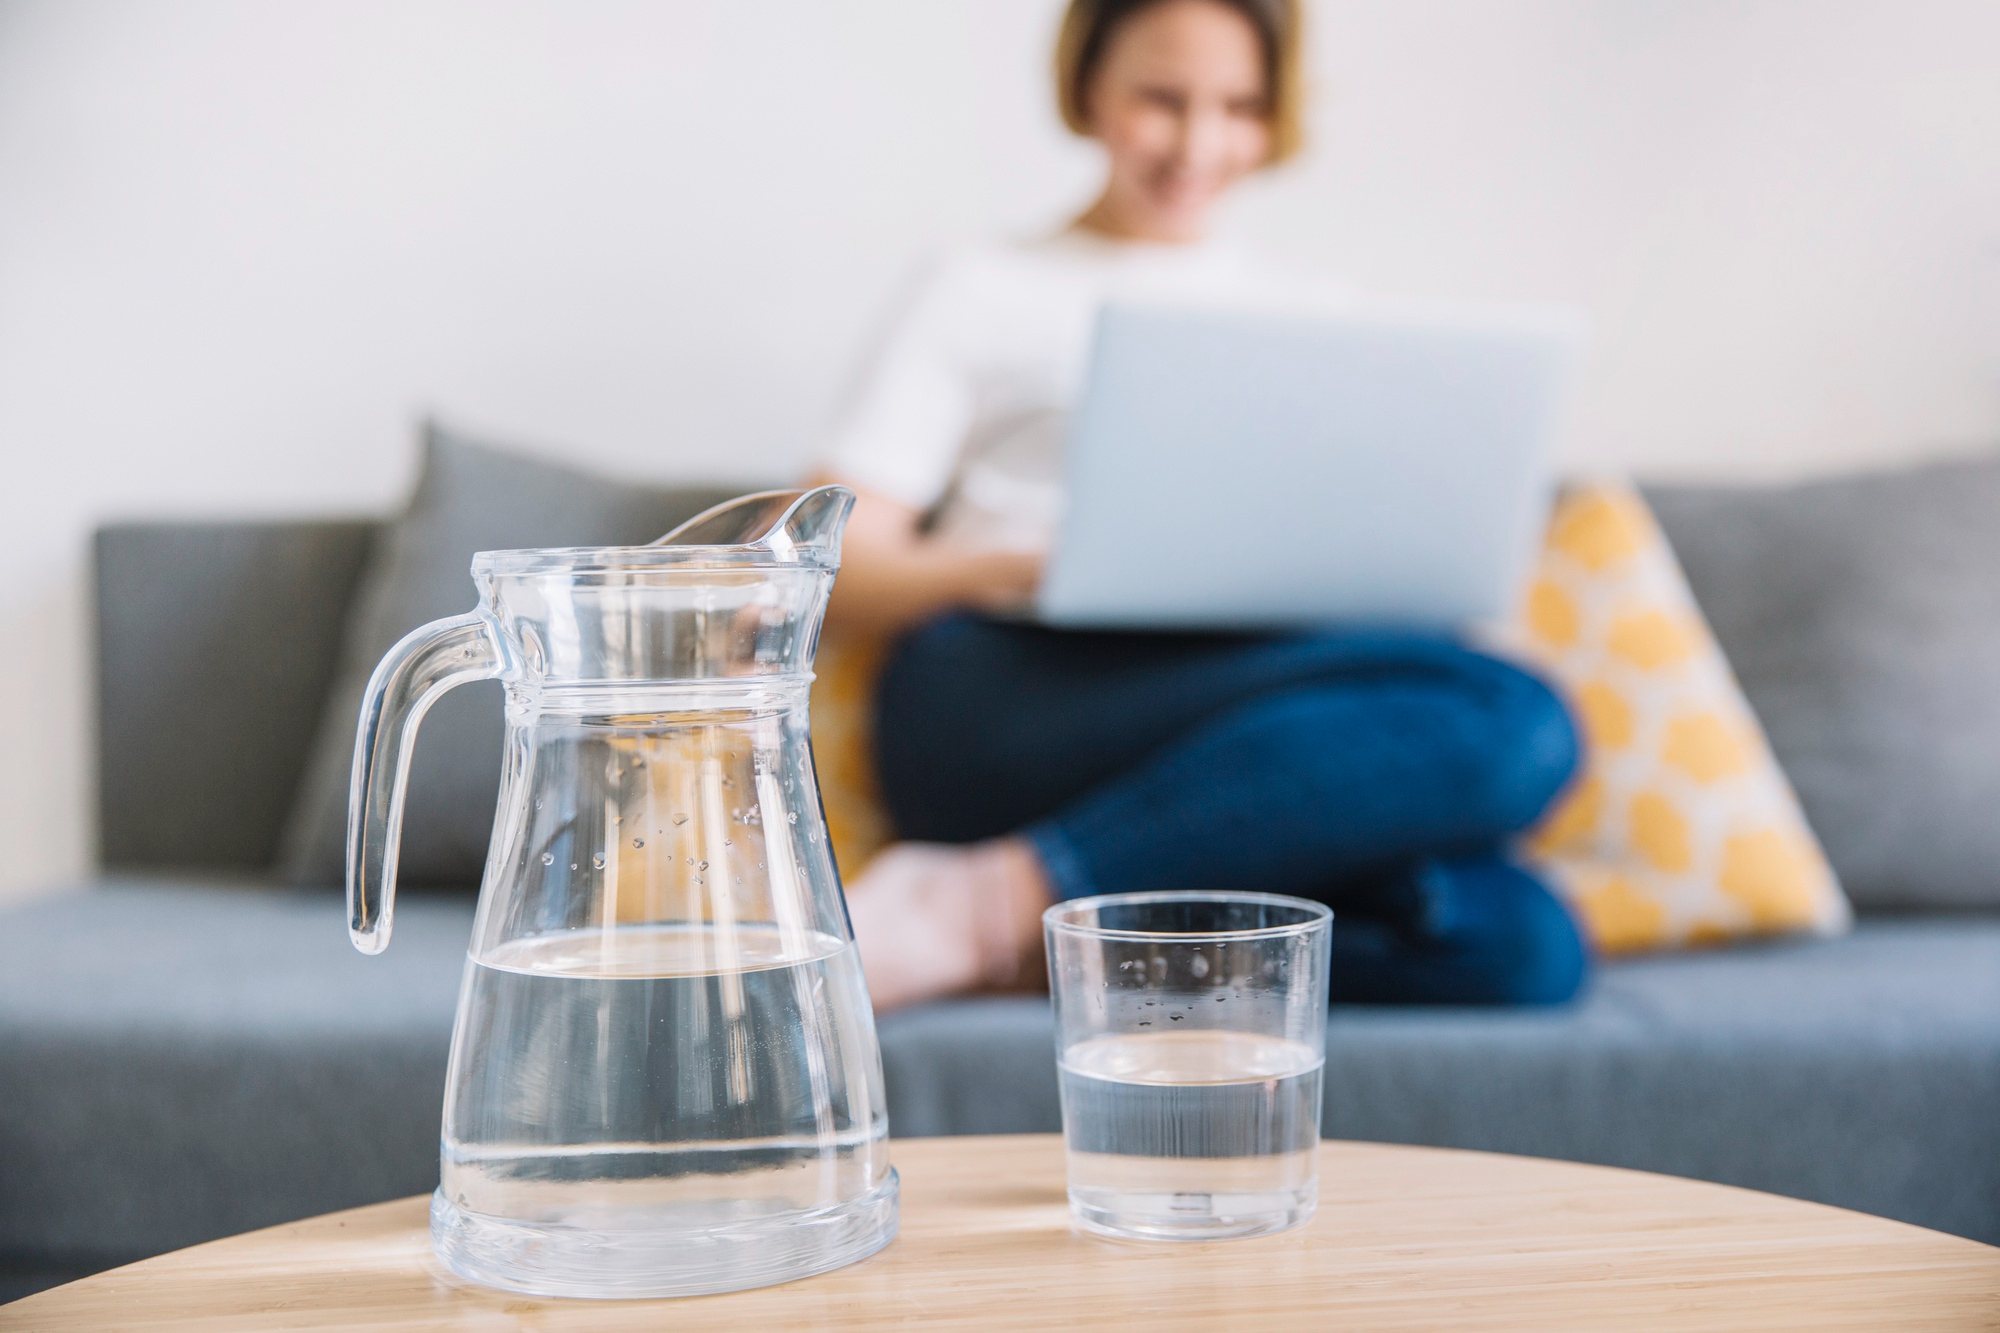 A jug and a glass of water on the foreground while a working woman on a laptop sits on a sofa in the background